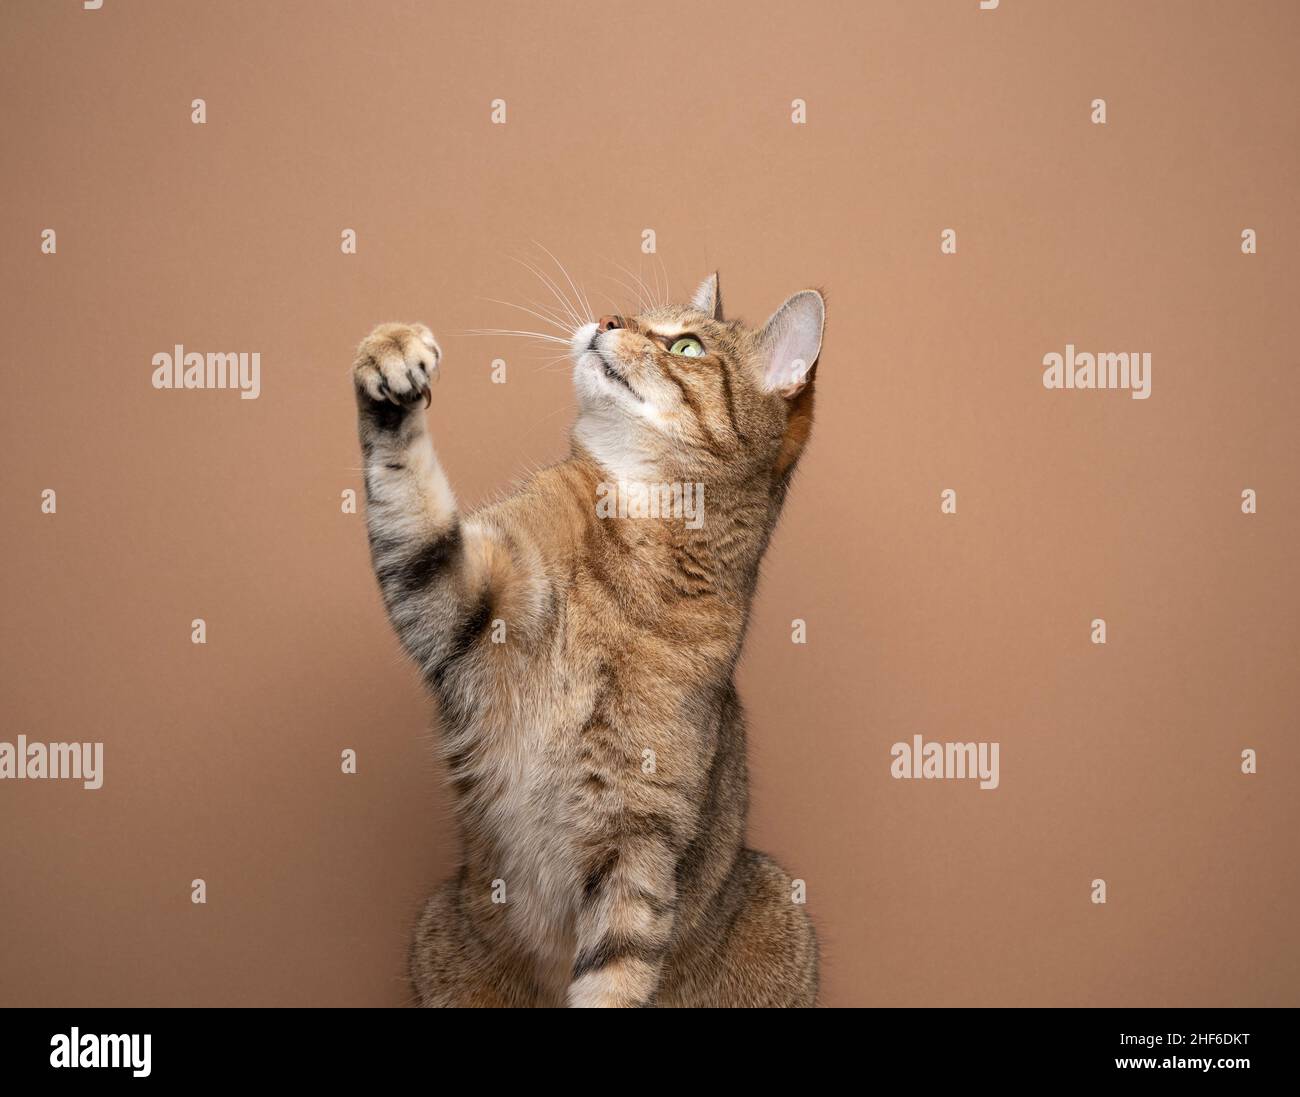 brown tabby cat raising paw looking up on light brown background with copy space Stock Photo